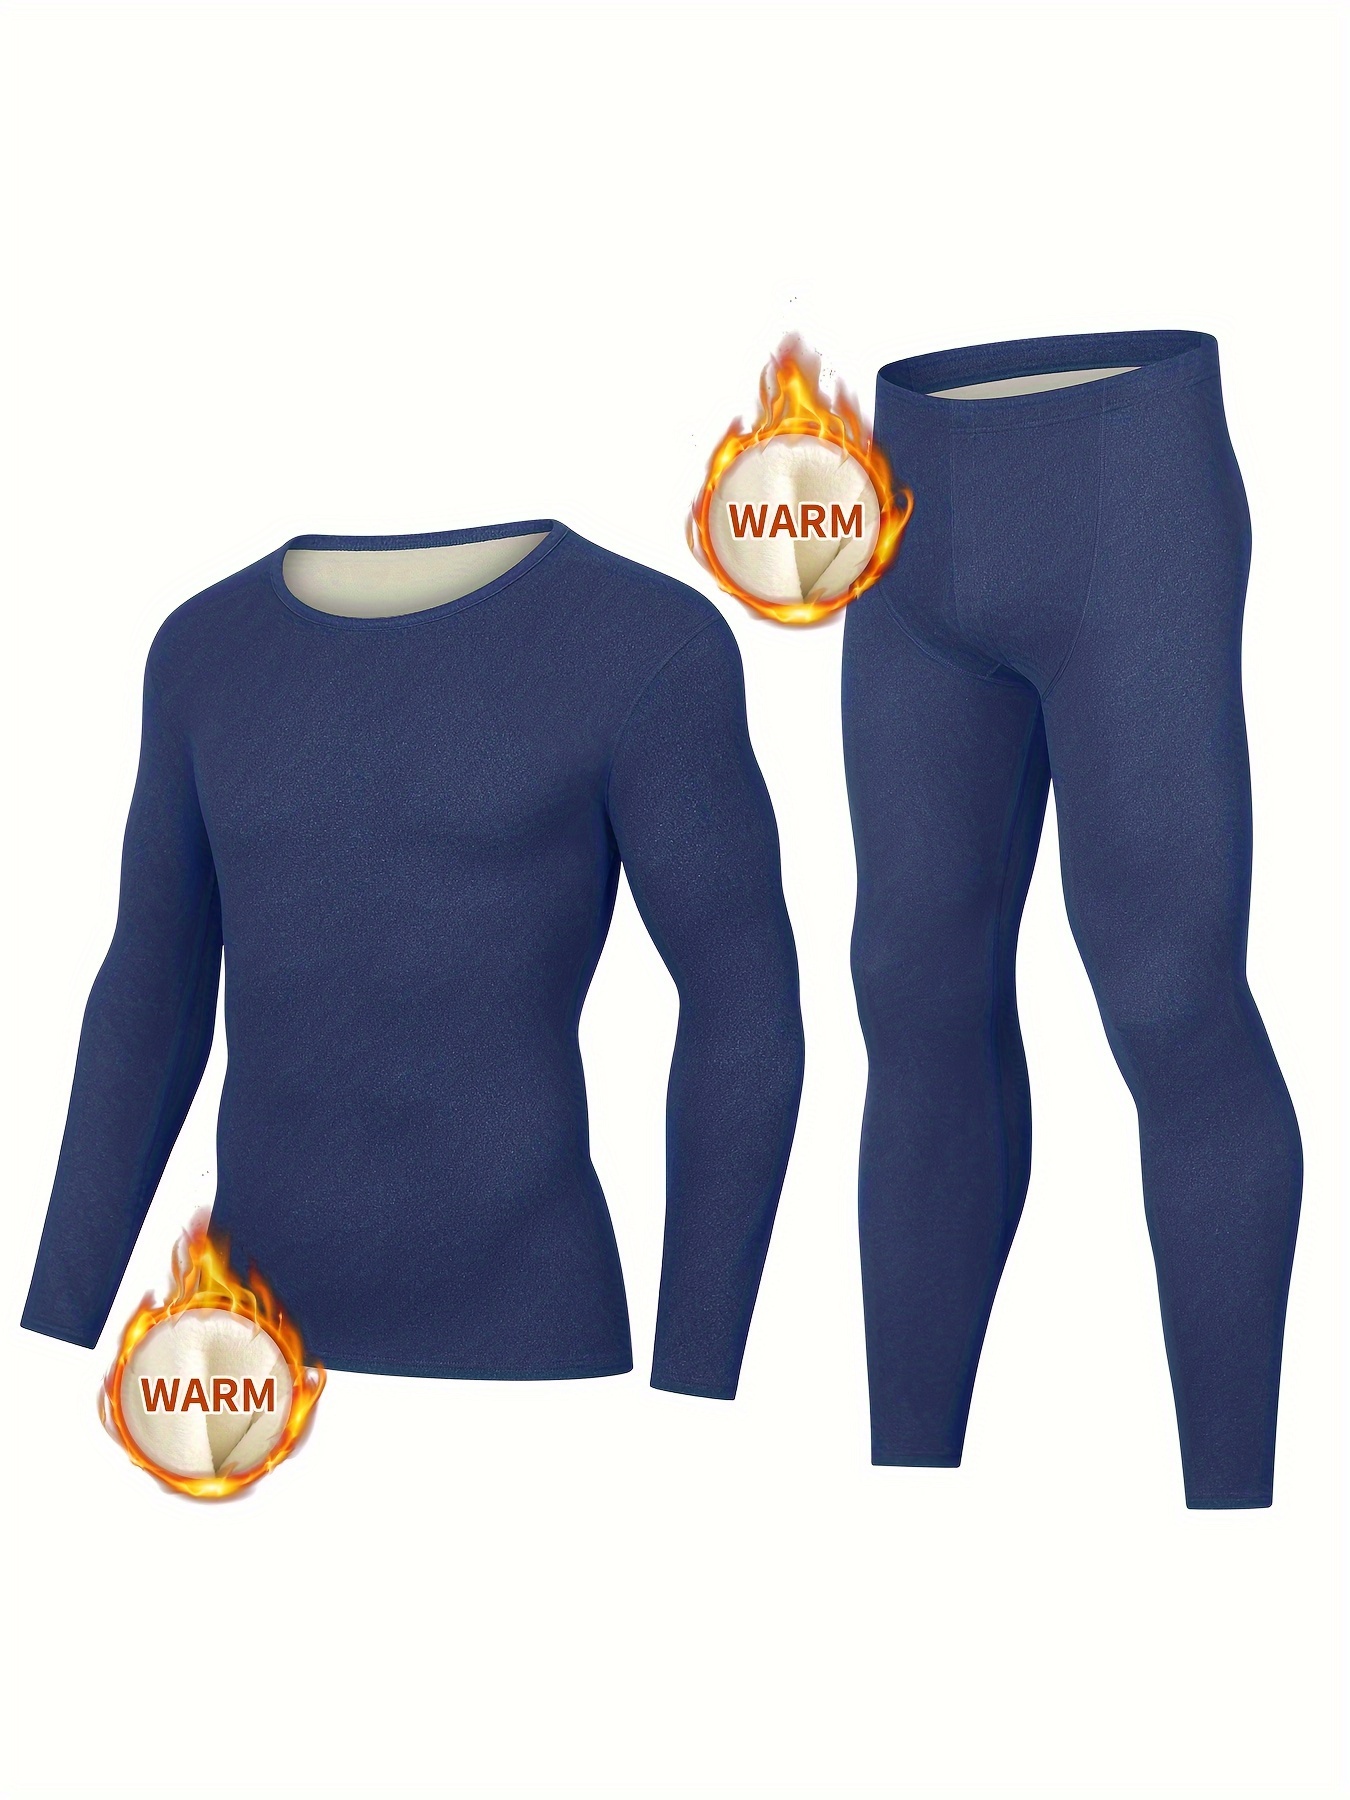 Men's Thermal Underwear Set, Thickened Soft Fleece Cold-proof Autumn Winter  Clothing, Base Layer Set, Long Sleeve Tops & Leggings Pants